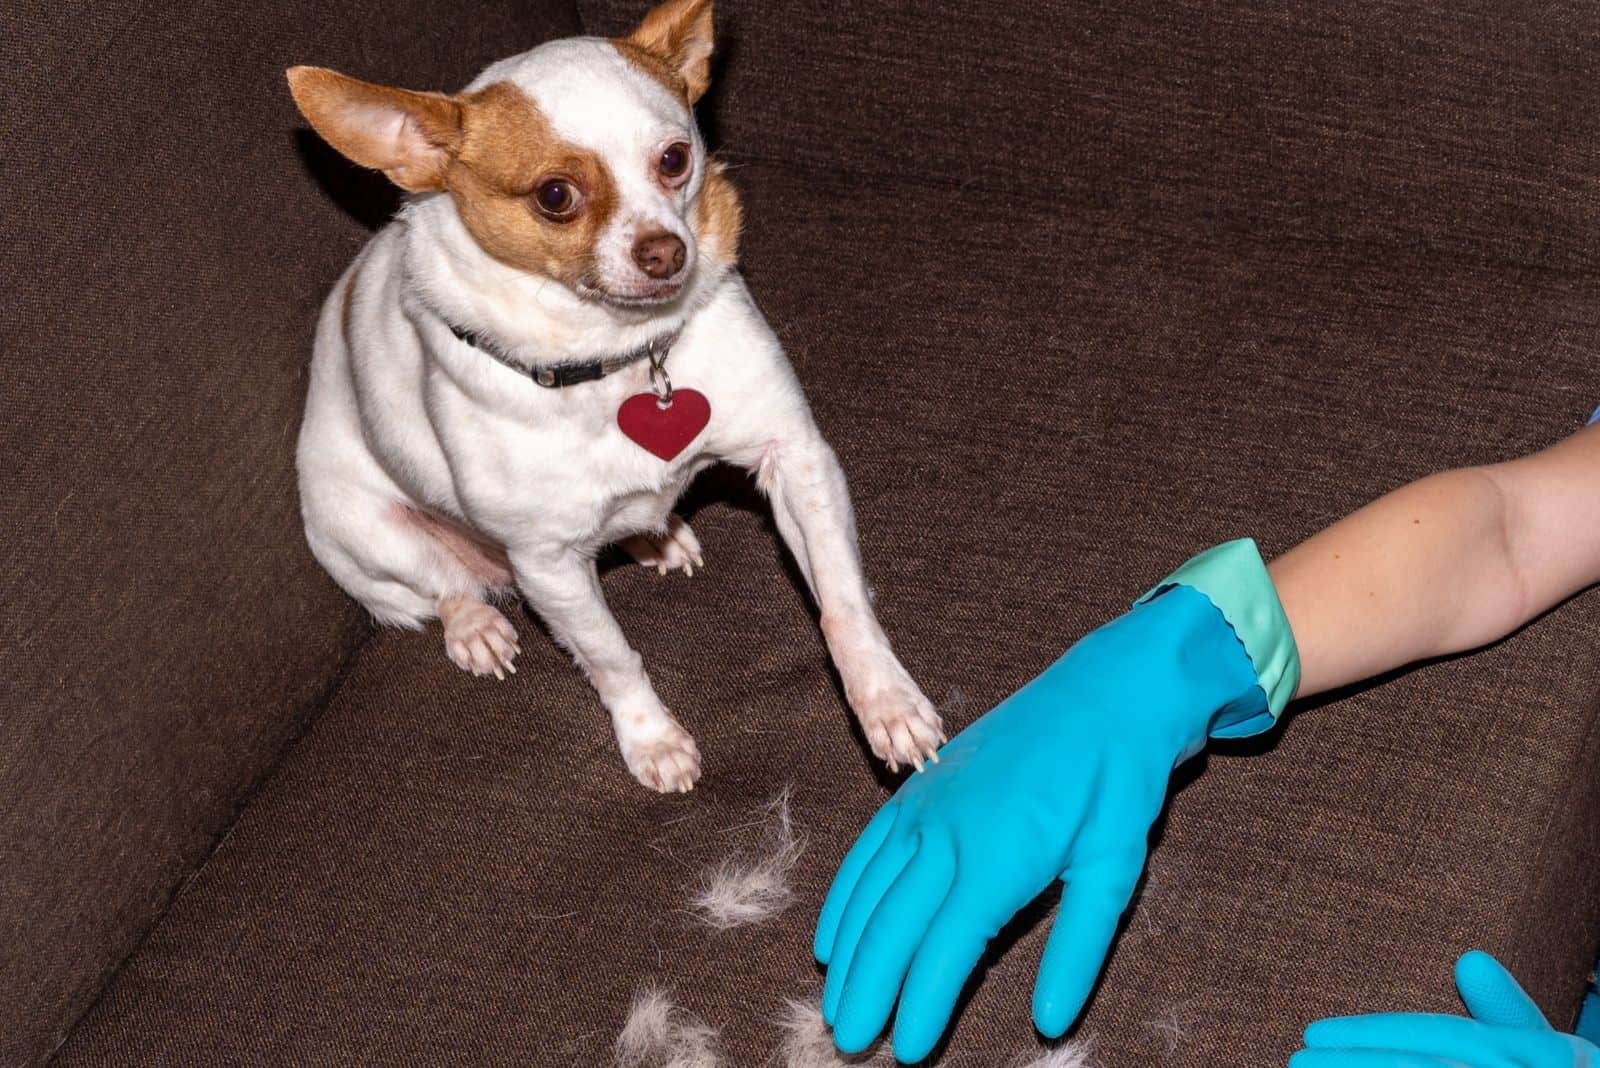 chihuahua shedding off fur cleaned by a person in the sofa